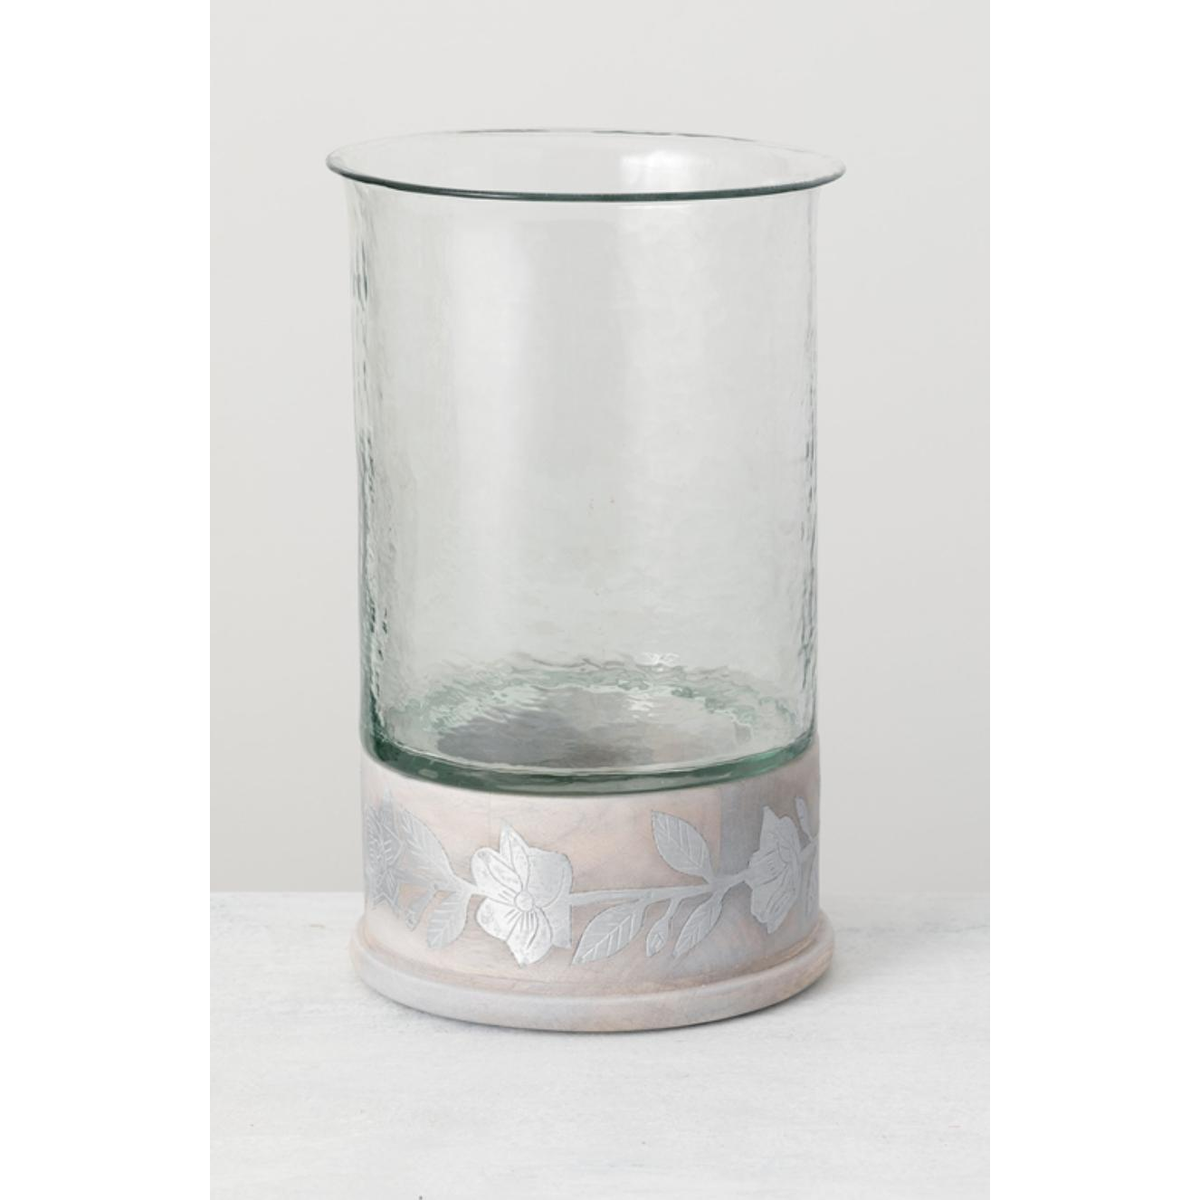 Magnolia Patterned Candle Holder - Zinnias Gift Boutique